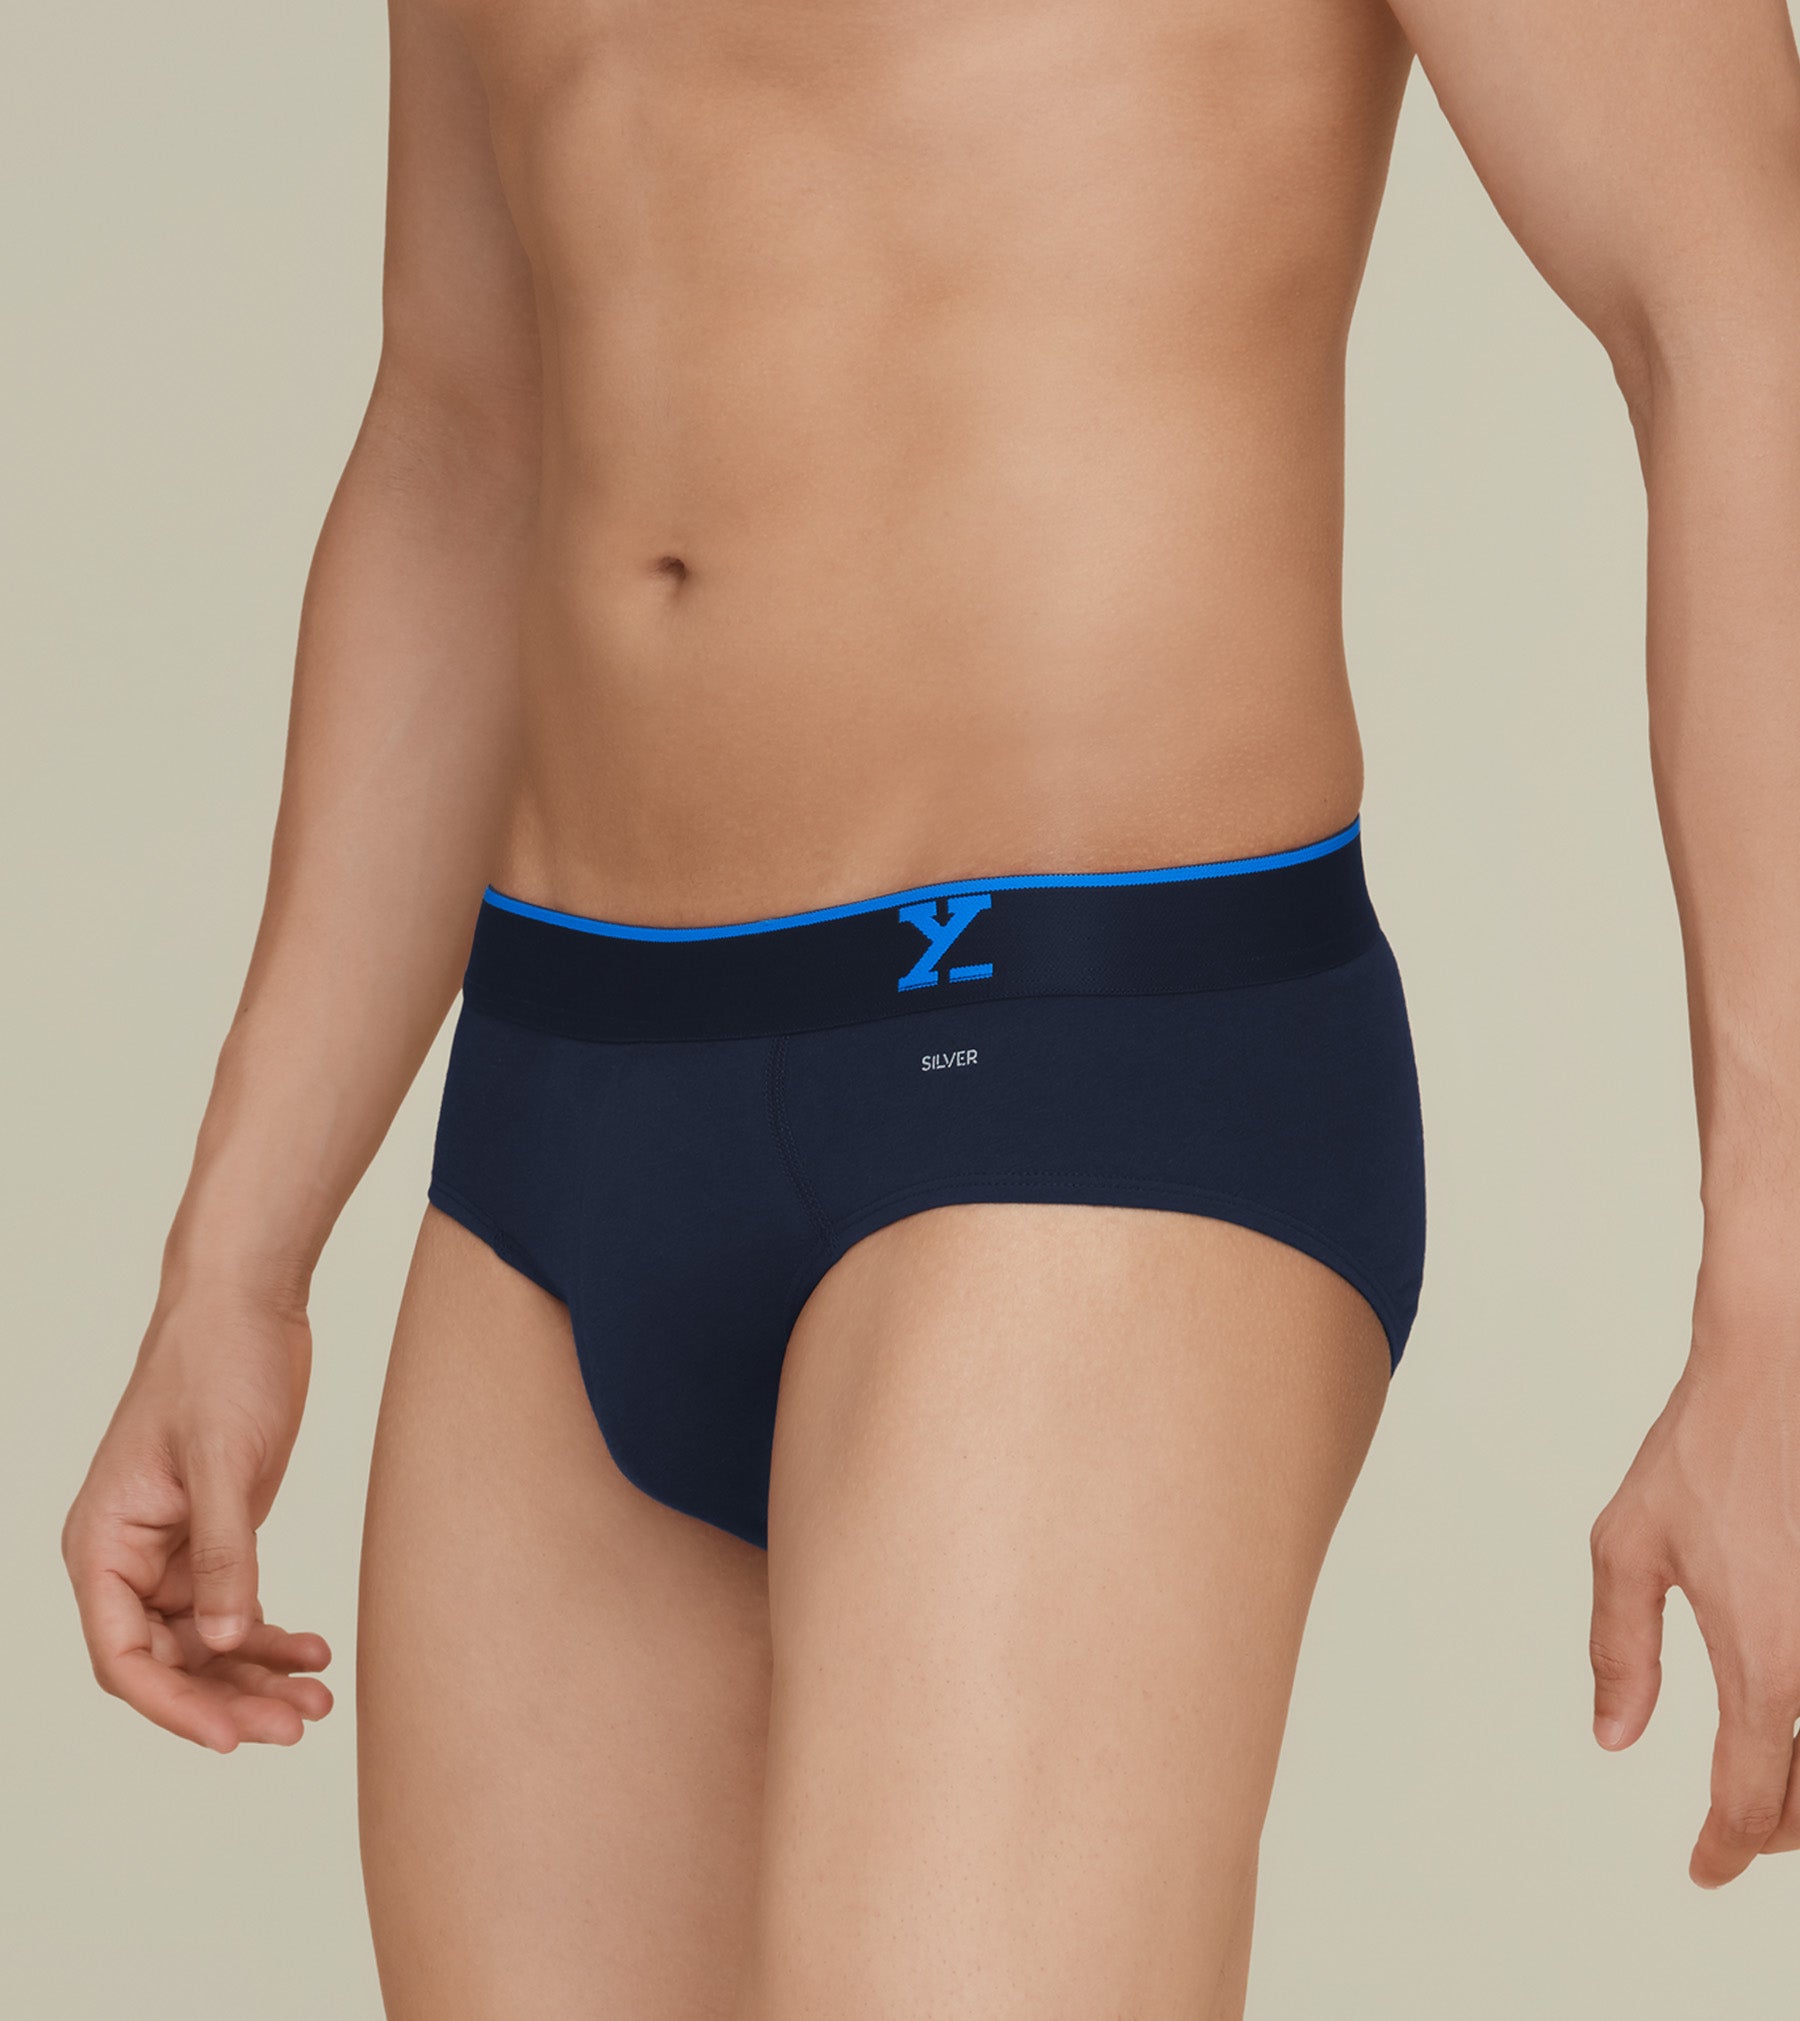 Traq Silver Cotton Briefs For Men Pack of 3(Dark Blue, Red, Light Blue) -  XYXX Mens Apparels